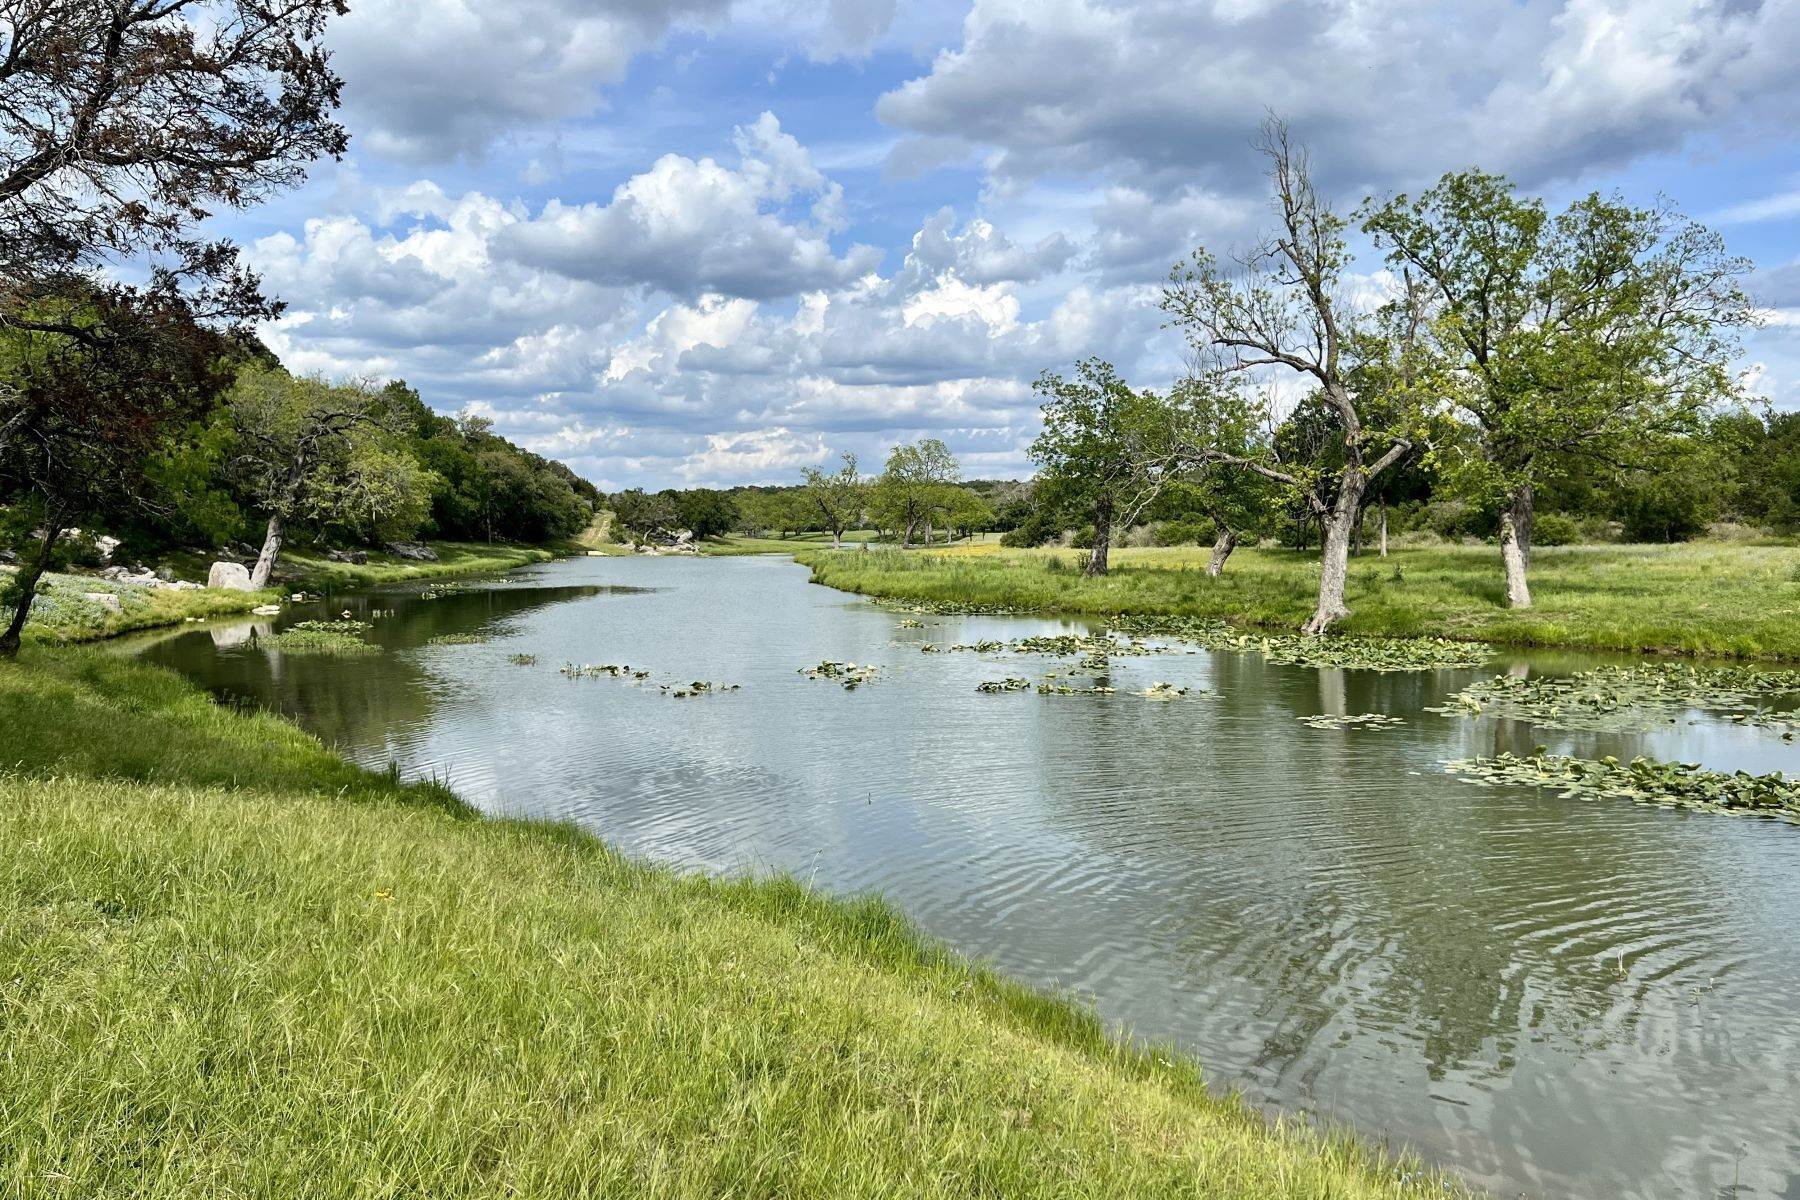 Farm and Ranch Properties for Sale at 1,700+/- Acres Cherokee Springs Ranch , Cherokee, TX 76877 1,700+/- Acres Cherokee Springs Ranch, FM 501, San Saba County Cherokee, Texas 76877 United States